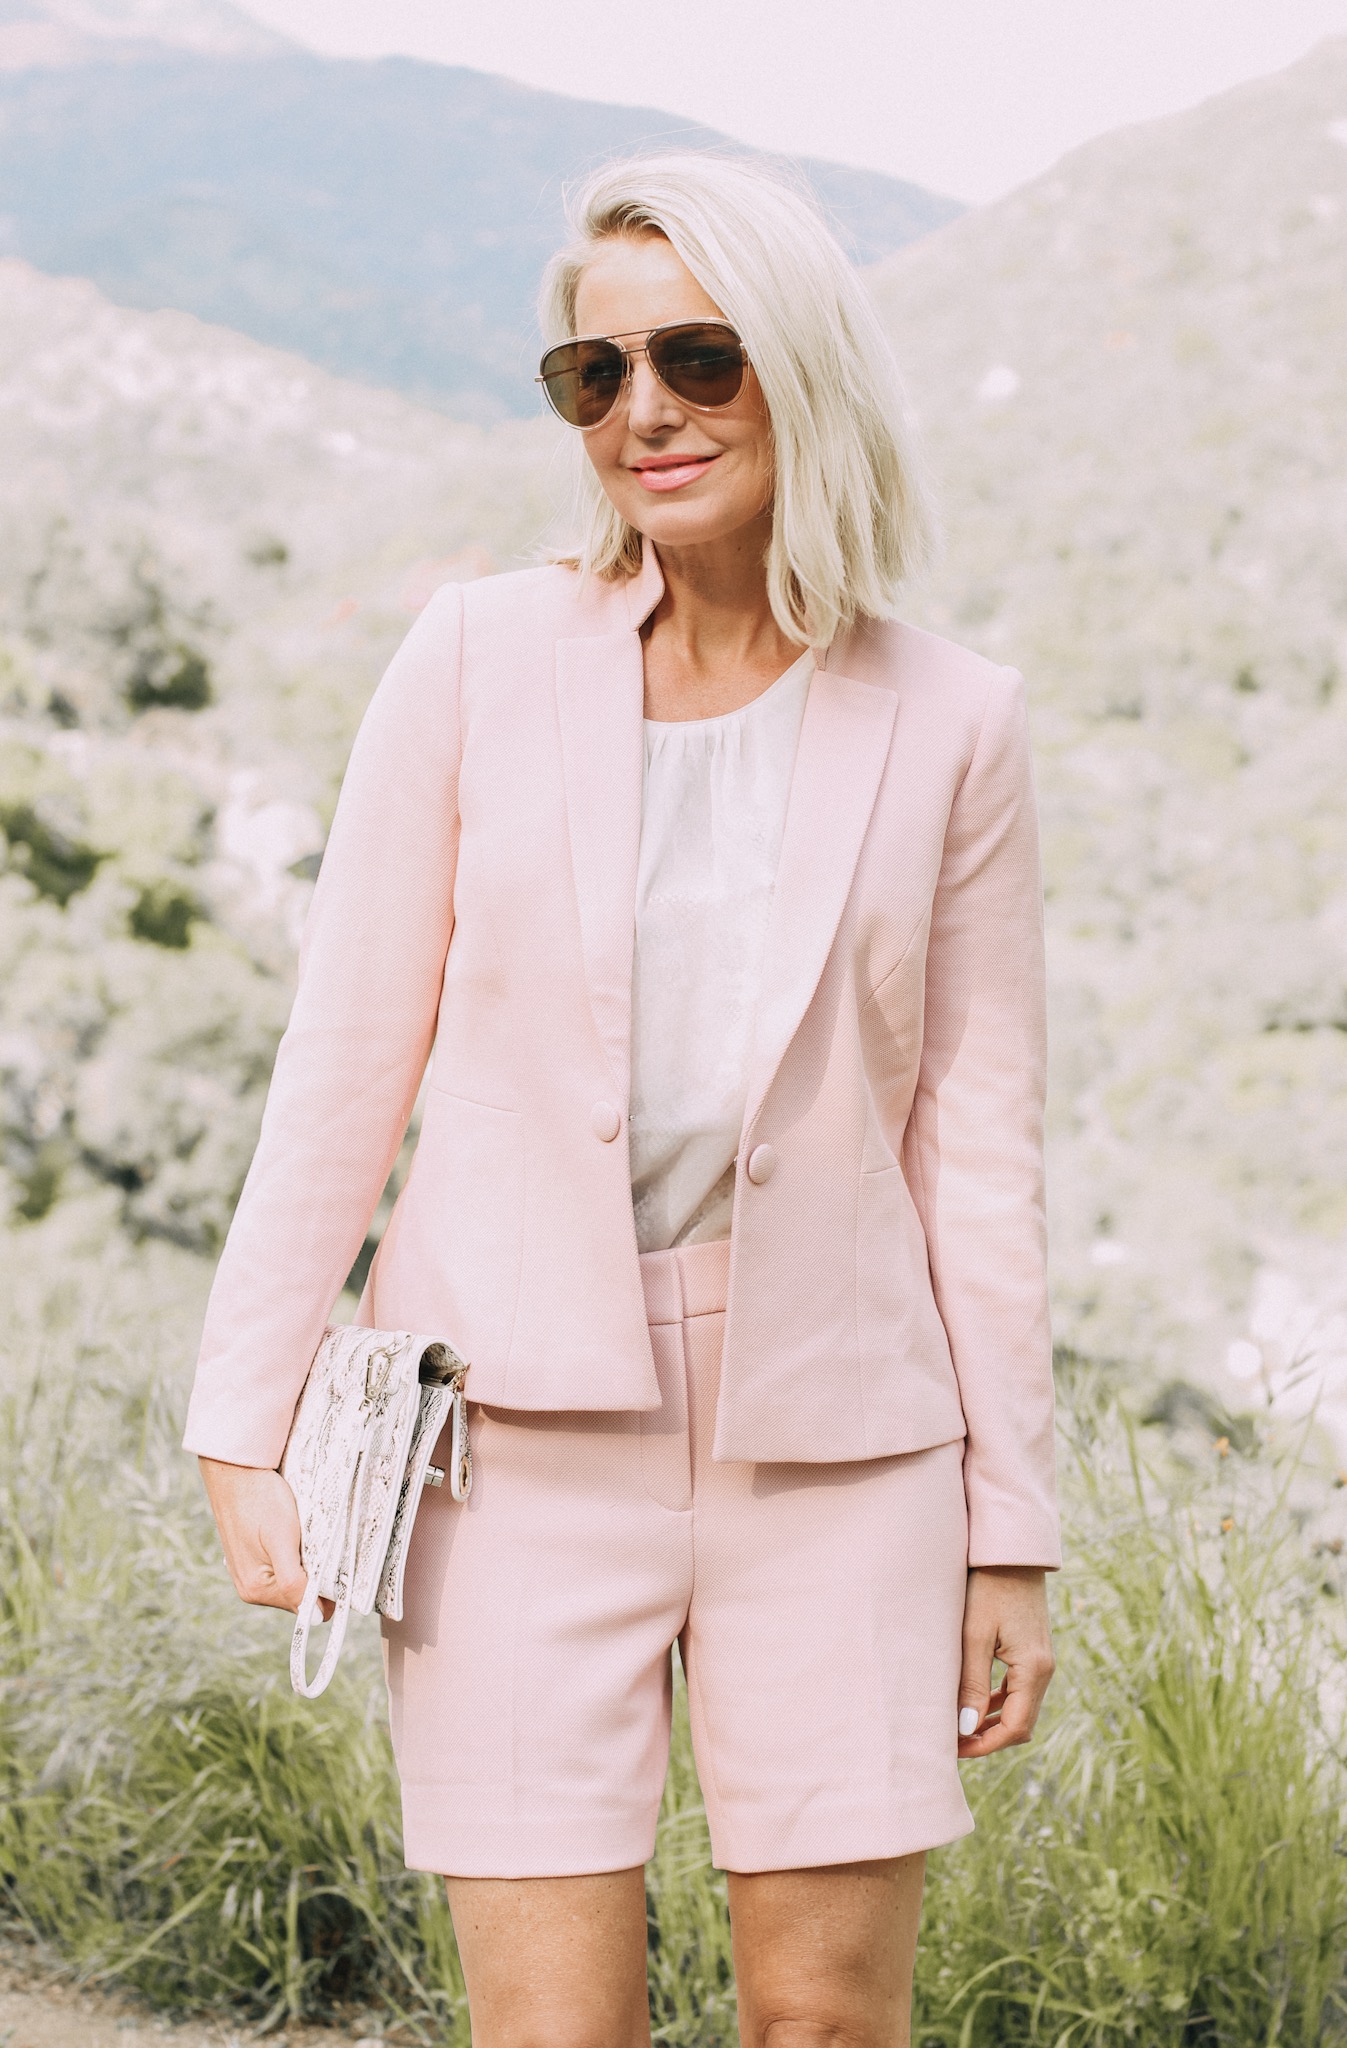 Spring Office Outfits, Fashion blogger Erin Busbee of BusbeeStyle.com wearing matching pink shorts and blazer with pink snake print heels and clutch from White House Black Market in Sequoia National Park